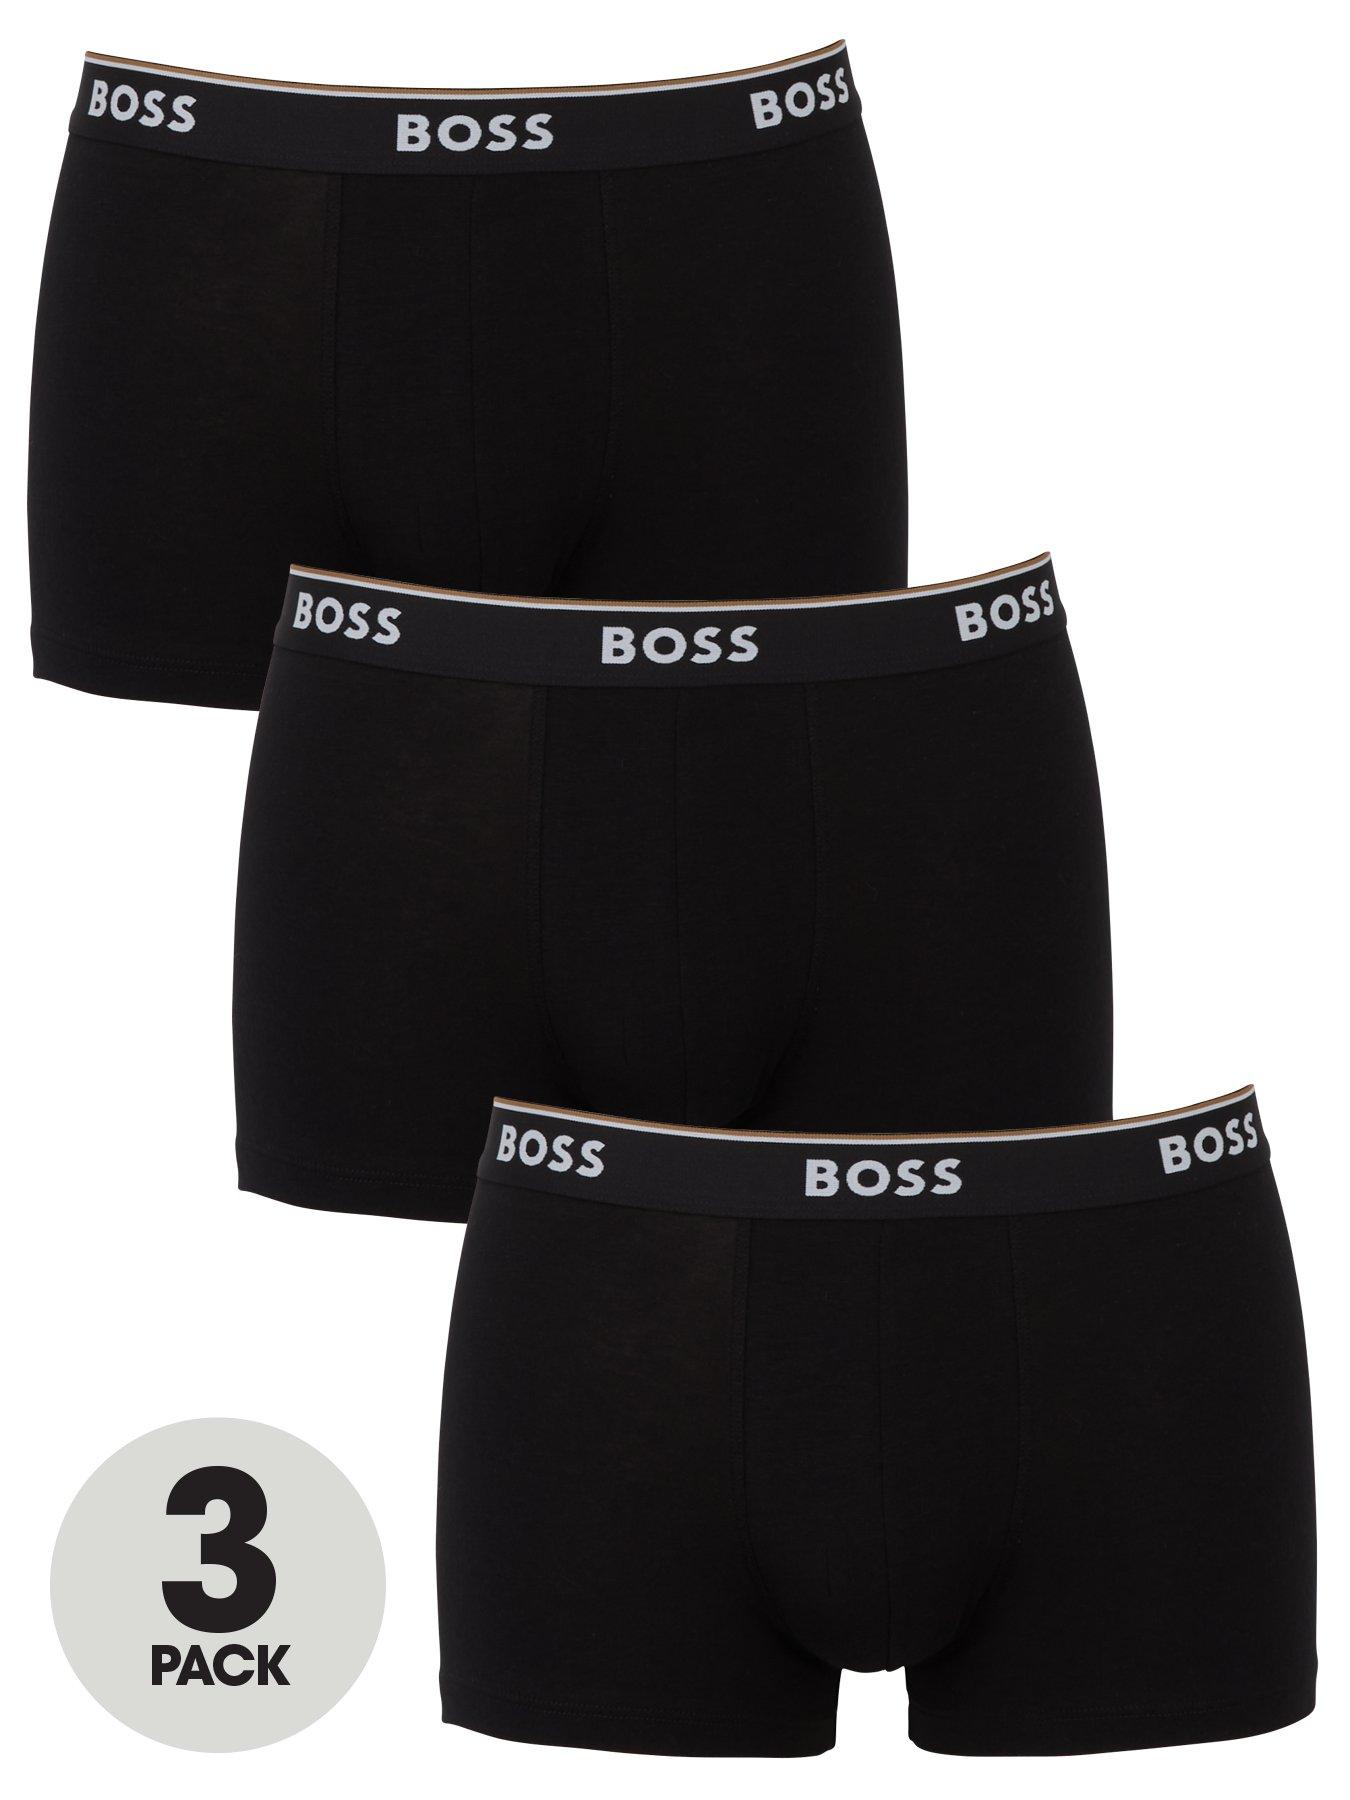 Versace 3-Pack Iconic Low-Rise Men's Boxer Trunks, Black/White/Navy